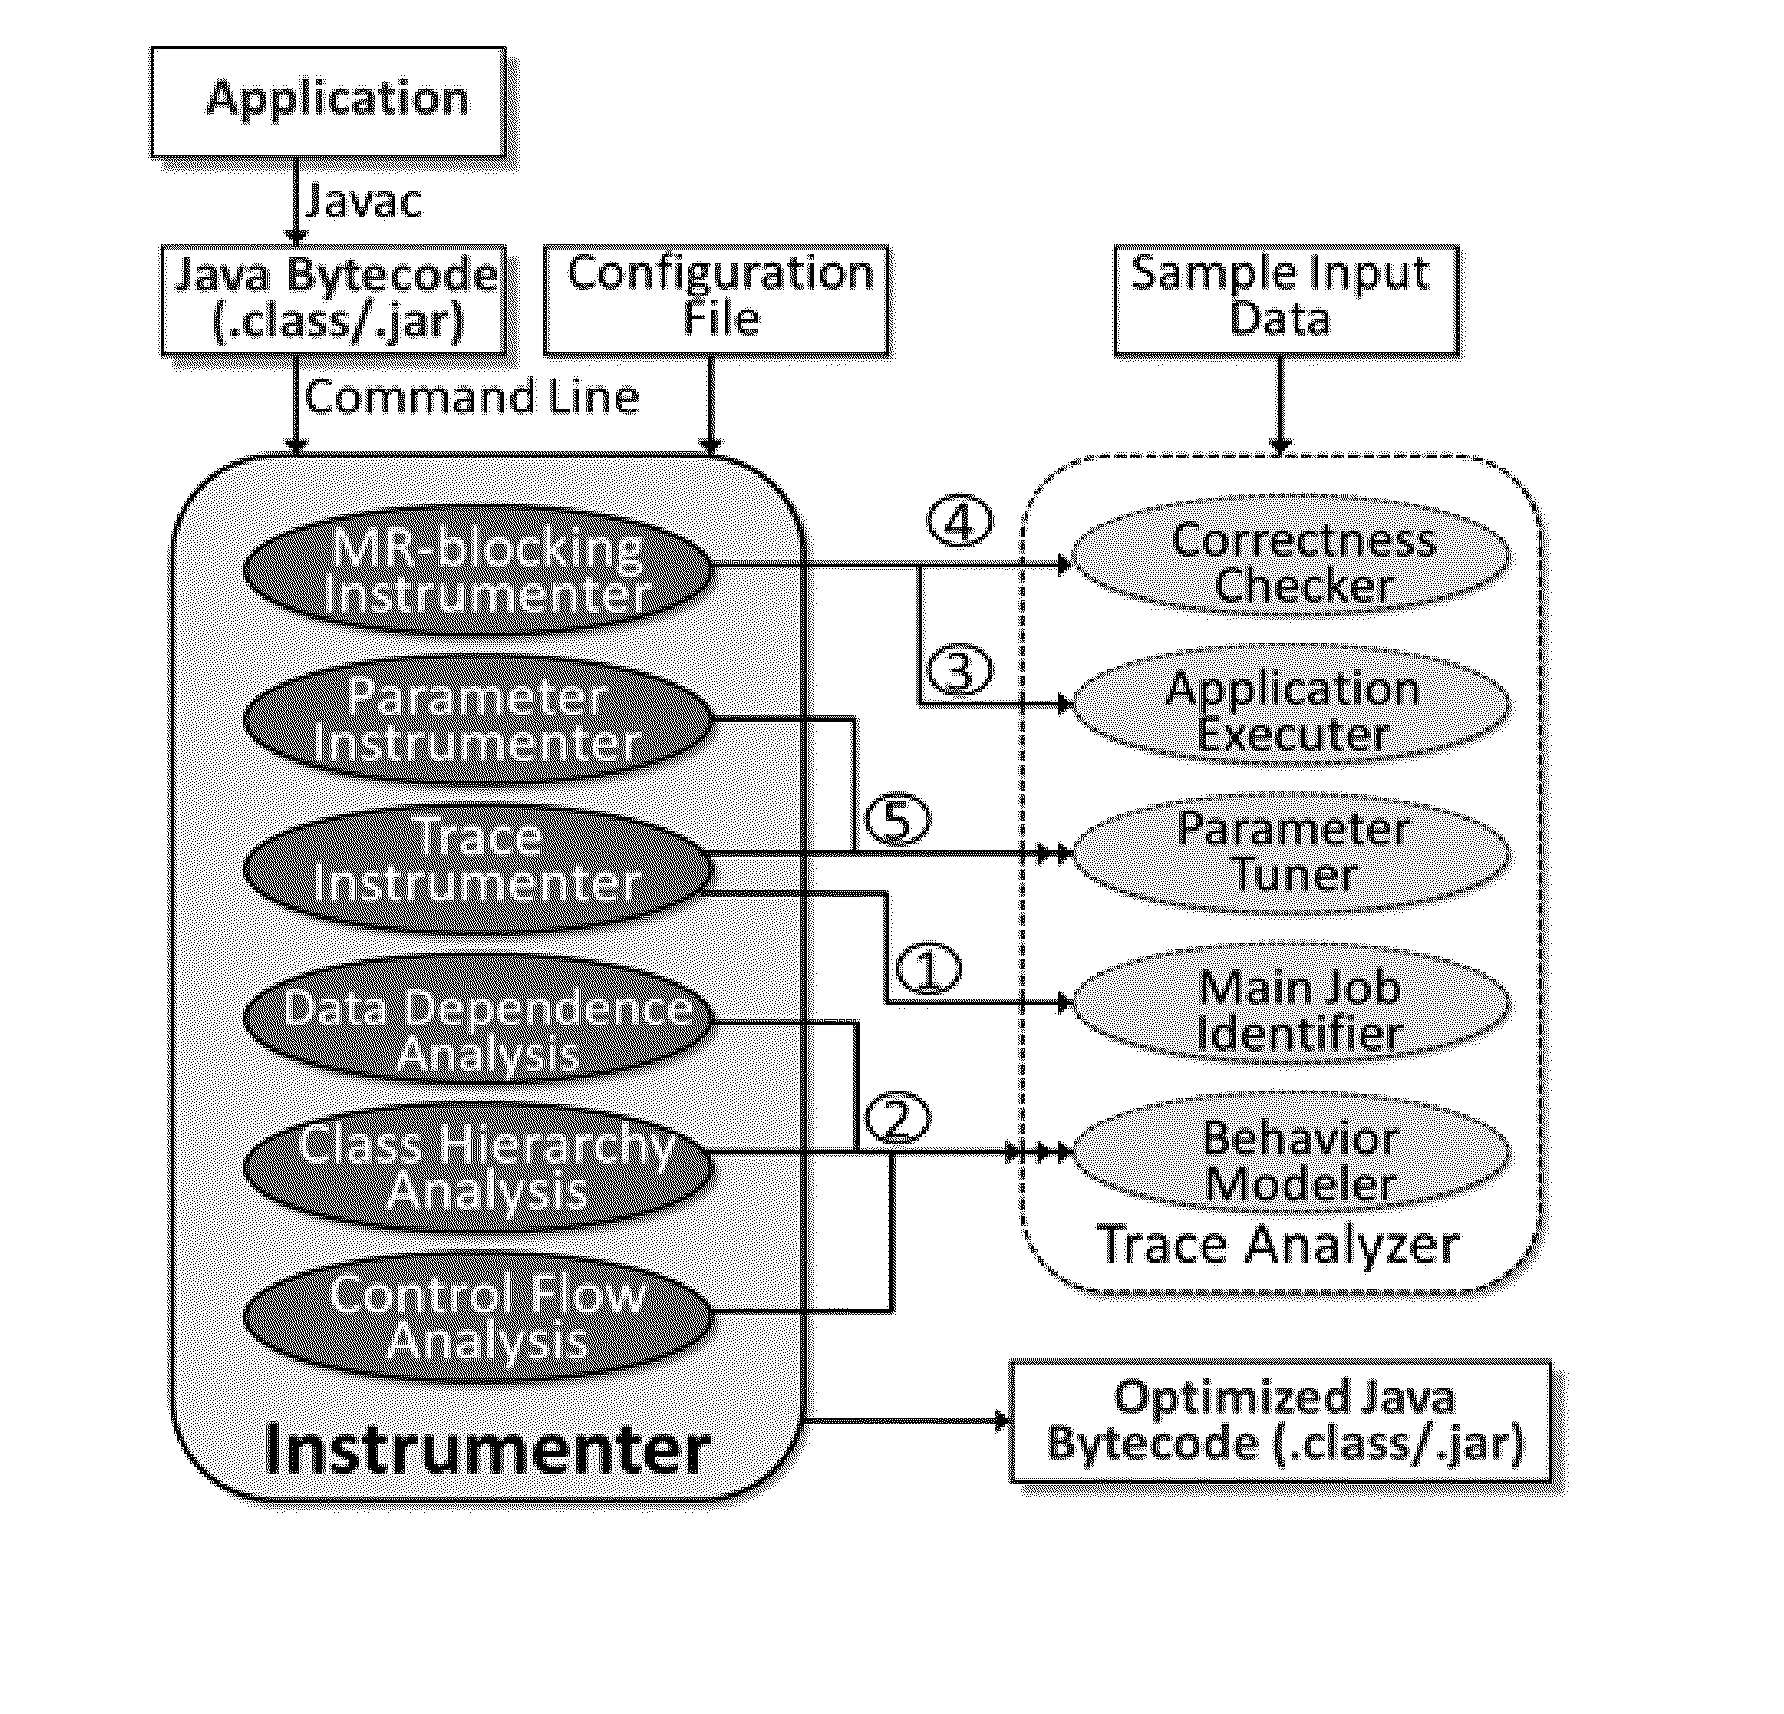 Computer-guided holistic optimization of MapReduce applications